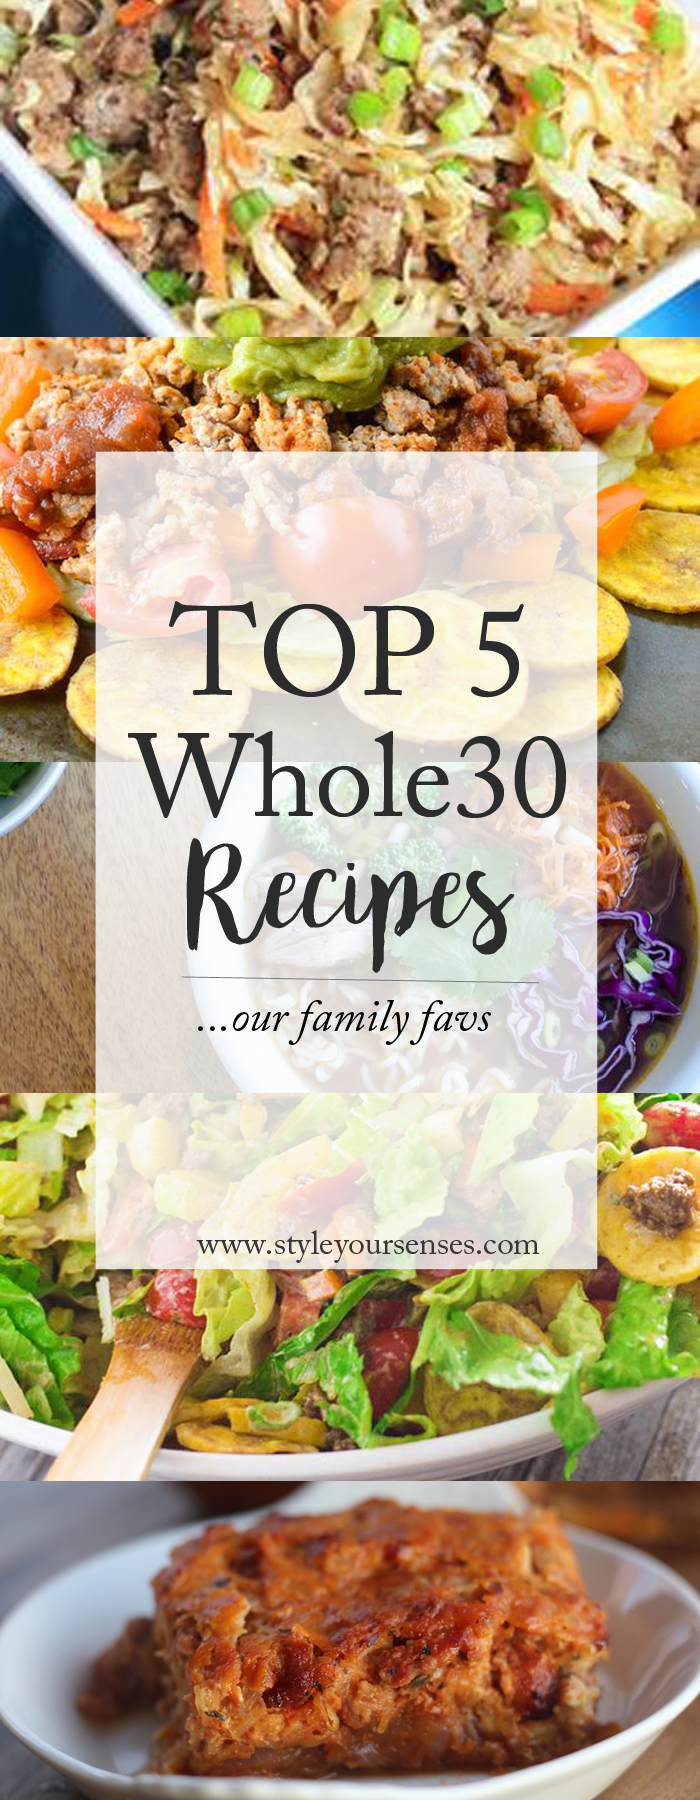 Whole30 Favorite Recipes featured by popular Texas lifestyle blogger, Style Your Senses